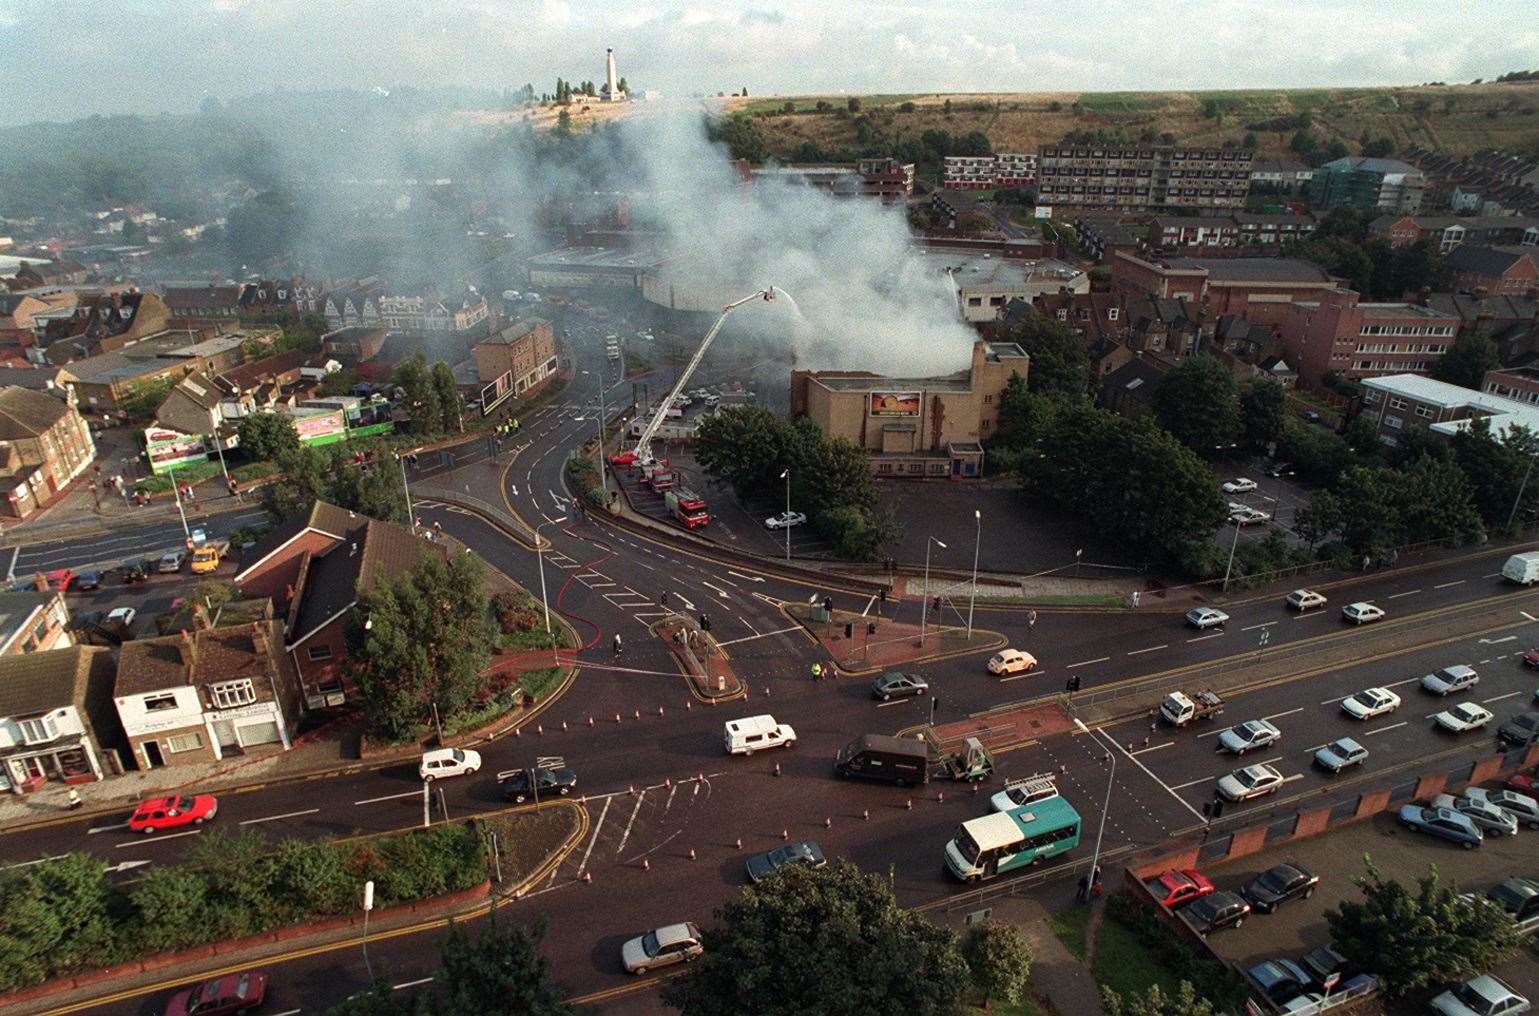 An excellent photograph from the Bryant Street flats shows the fire at the old Gala bingo hall in 1998